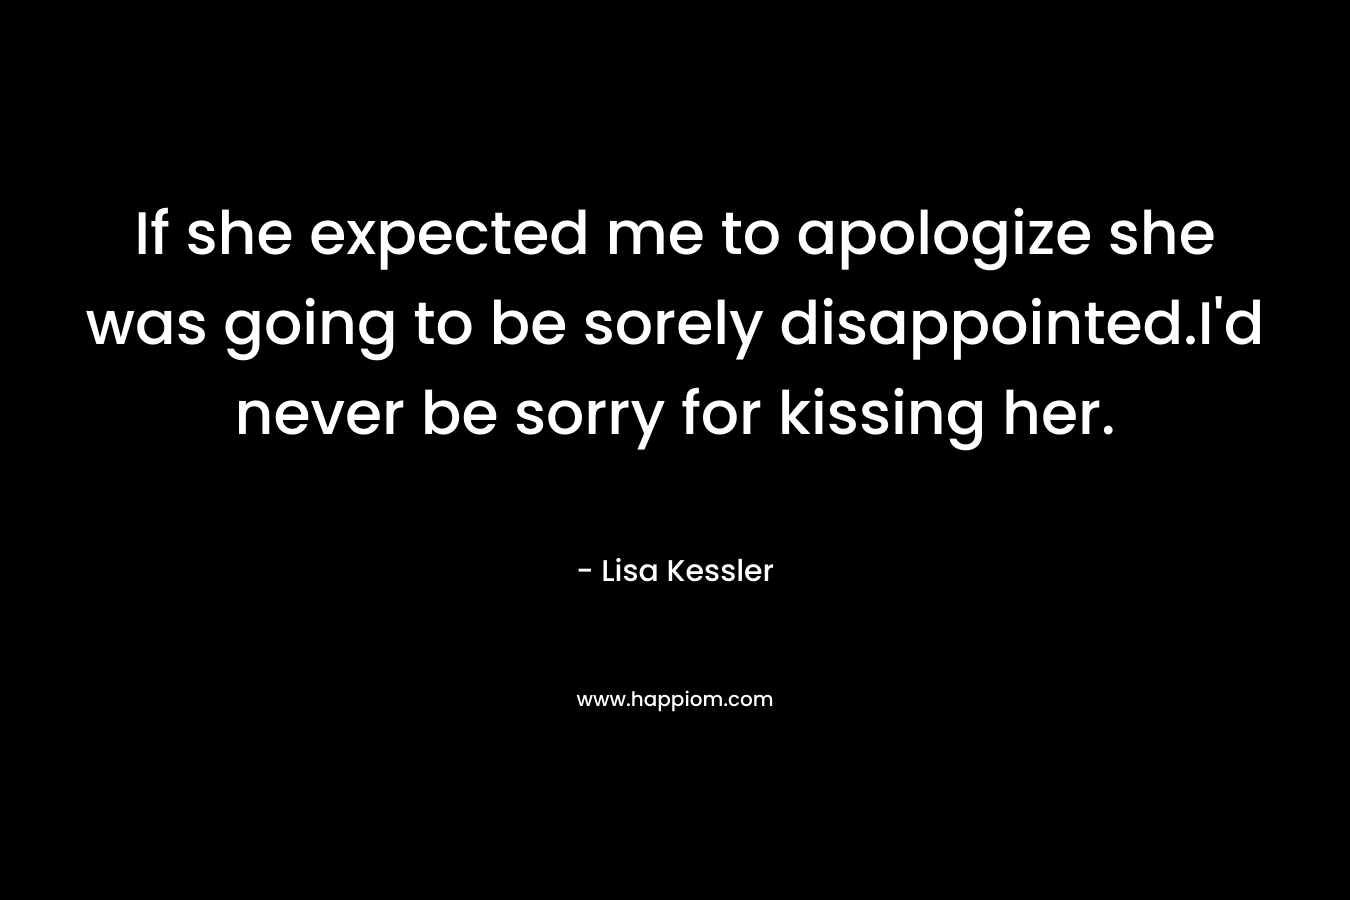 If she expected me to apologize she was going to be sorely disappointed.I'd never be sorry for kissing her.